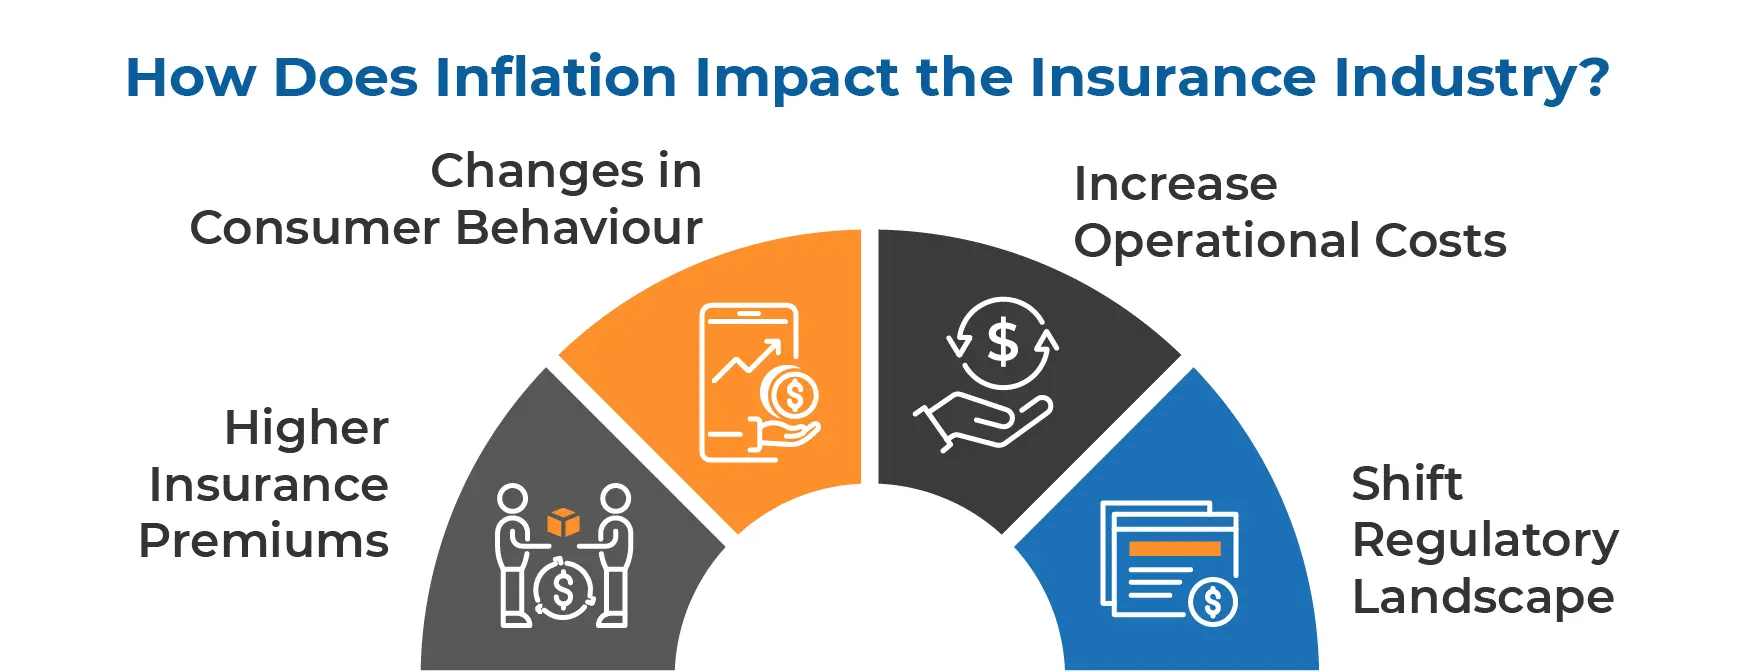 How Does Inflation Impact the Insurance Industry?